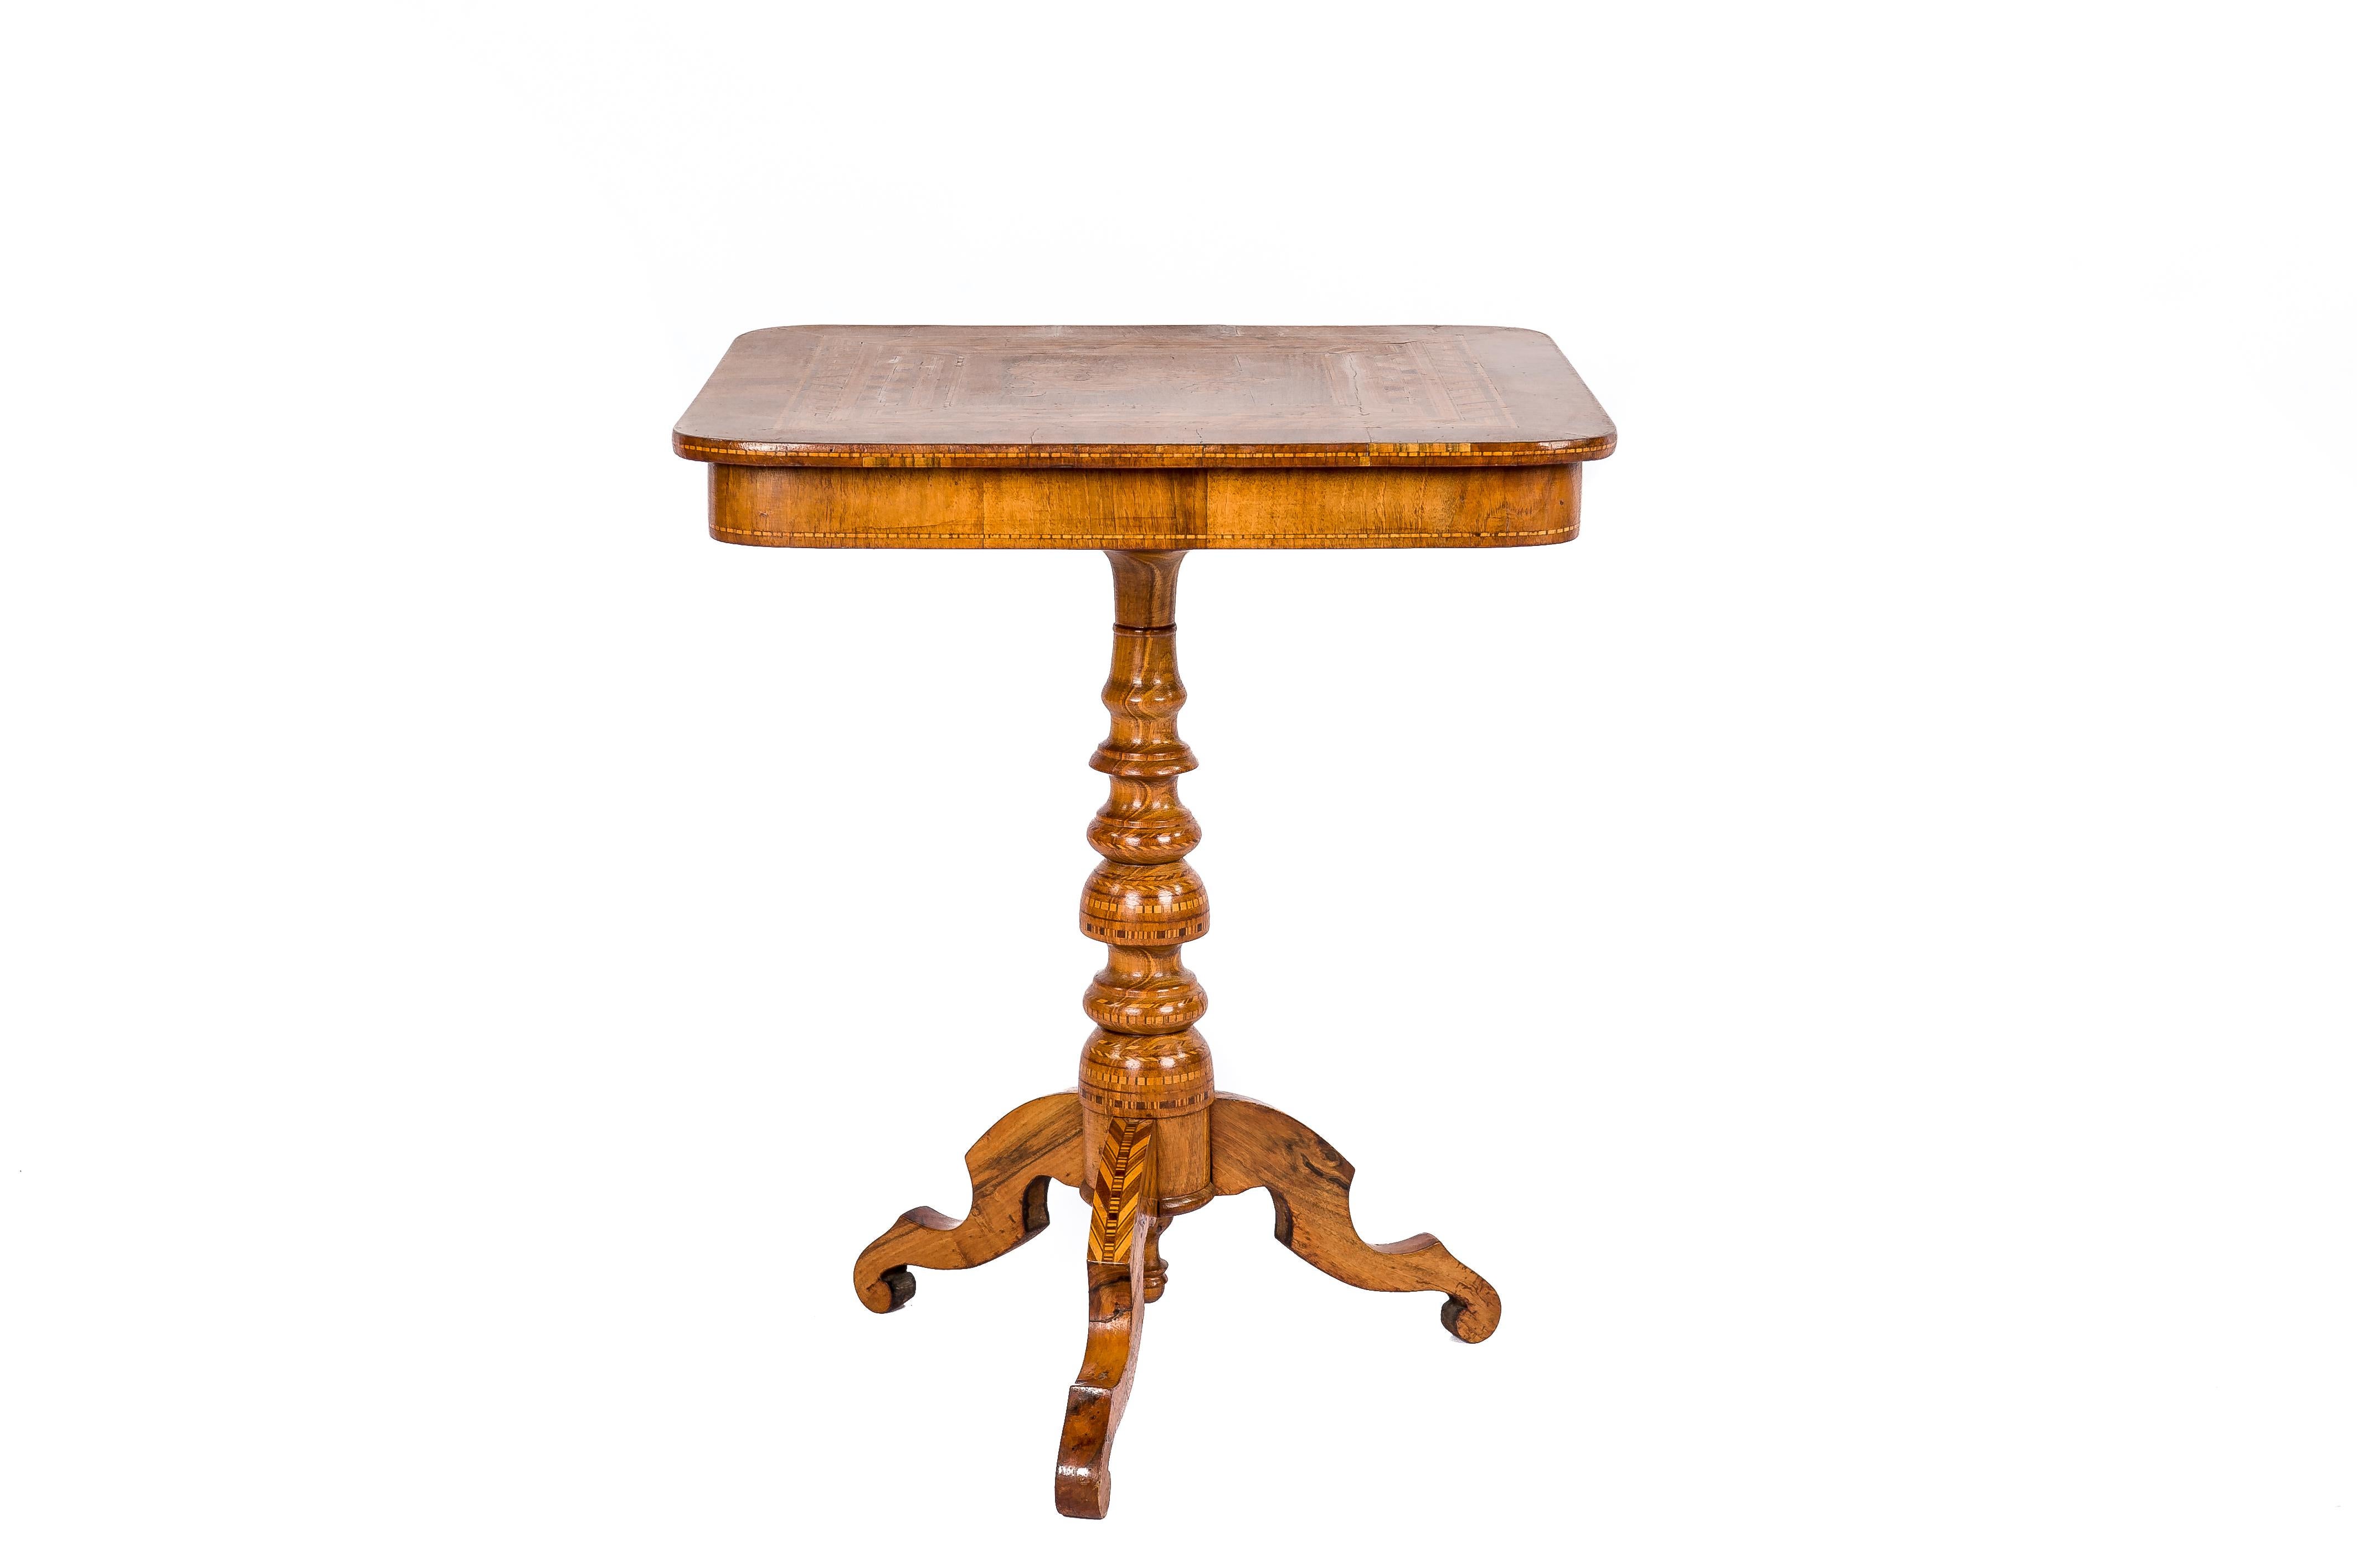 Antique 19th Century Italian Walnut Sorrento Occasional Table with Intarsia For Sale 1